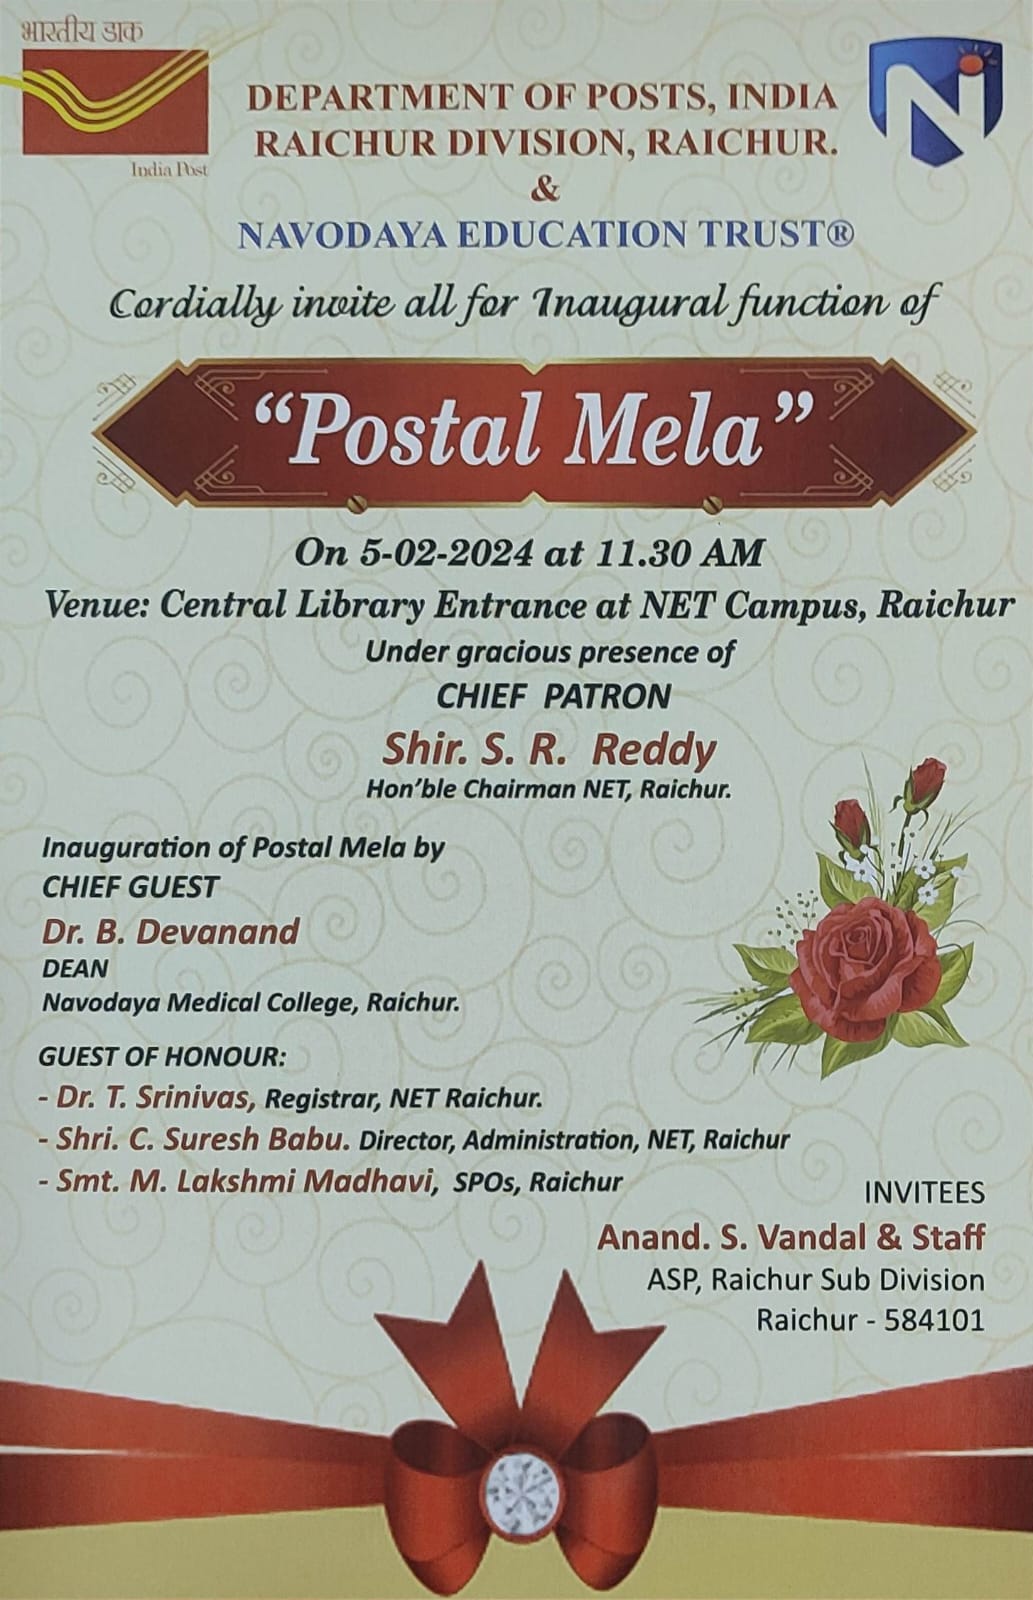 THE POST MELA Inaugural Function, Department of Posts ,India Raichur And Navodaya Education Trust, took place on February 5 ,2024 at Central Library Entrance of NET Campus in Raichur. 